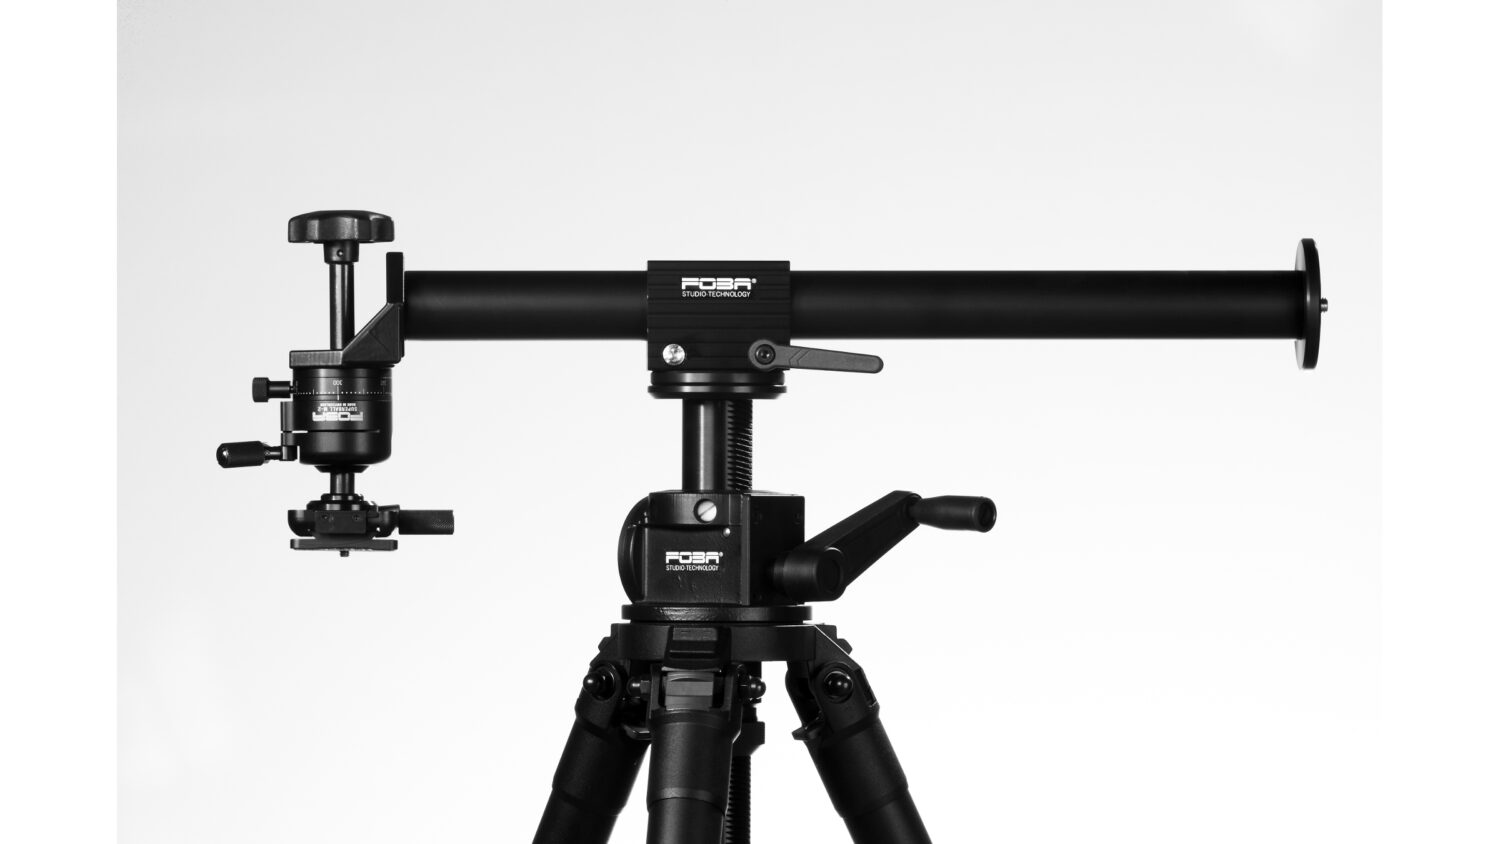 FOBA tripod with accessories and SUPERBALL